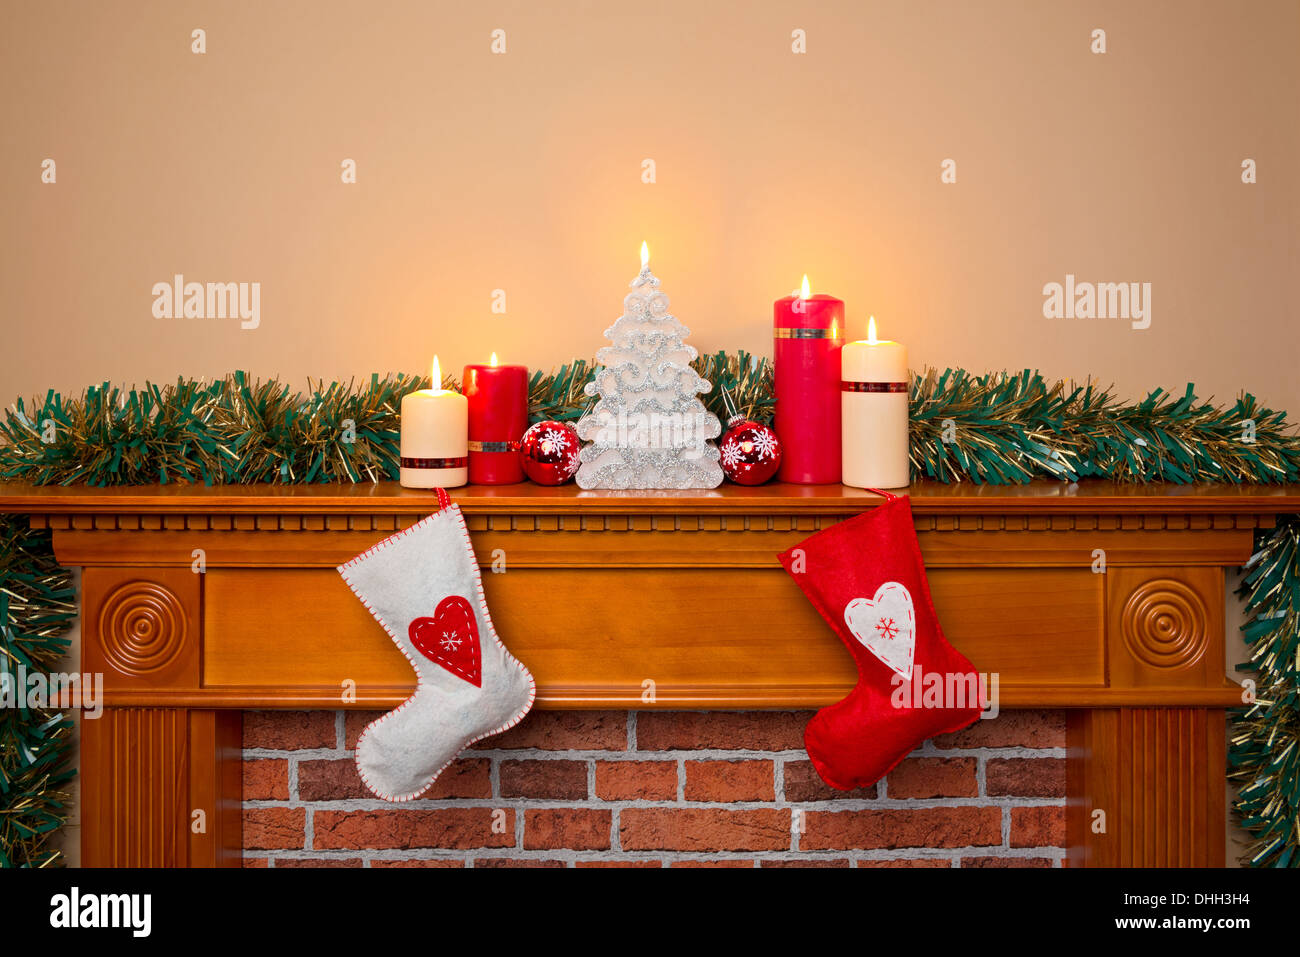 Christmas stockings hanging over a fireplace with candles on the mantlepiece Stock Photo